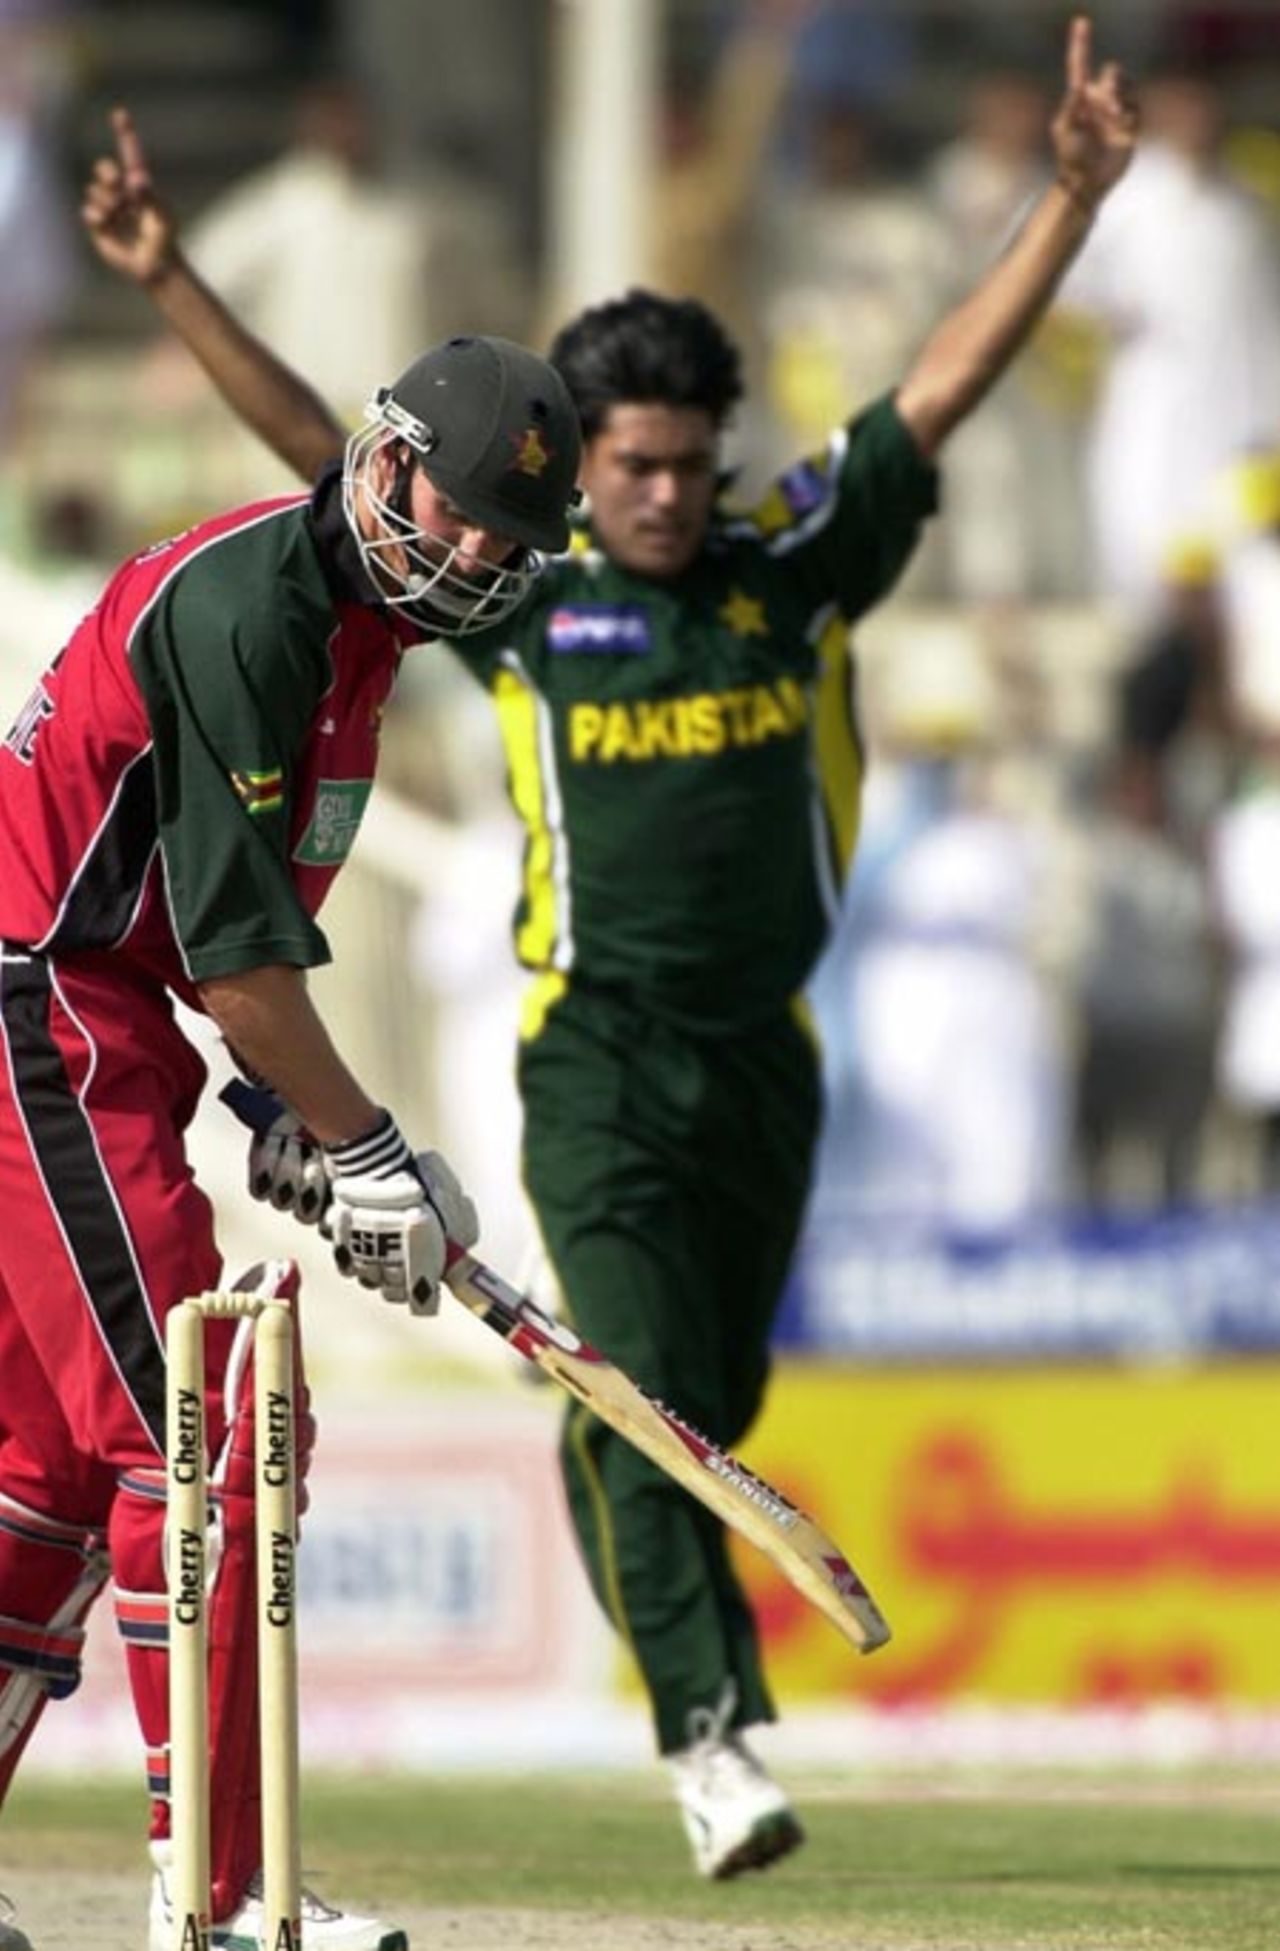 Zimbabwe's key batsman Douglas Marillier (L) looks back at his shattered stumps as Pakistani pacer Mohammad Sami (R) celebrates his third wicket during the final match of the Four Nation Sharjah Cricket Tournament, 10 April 2003.